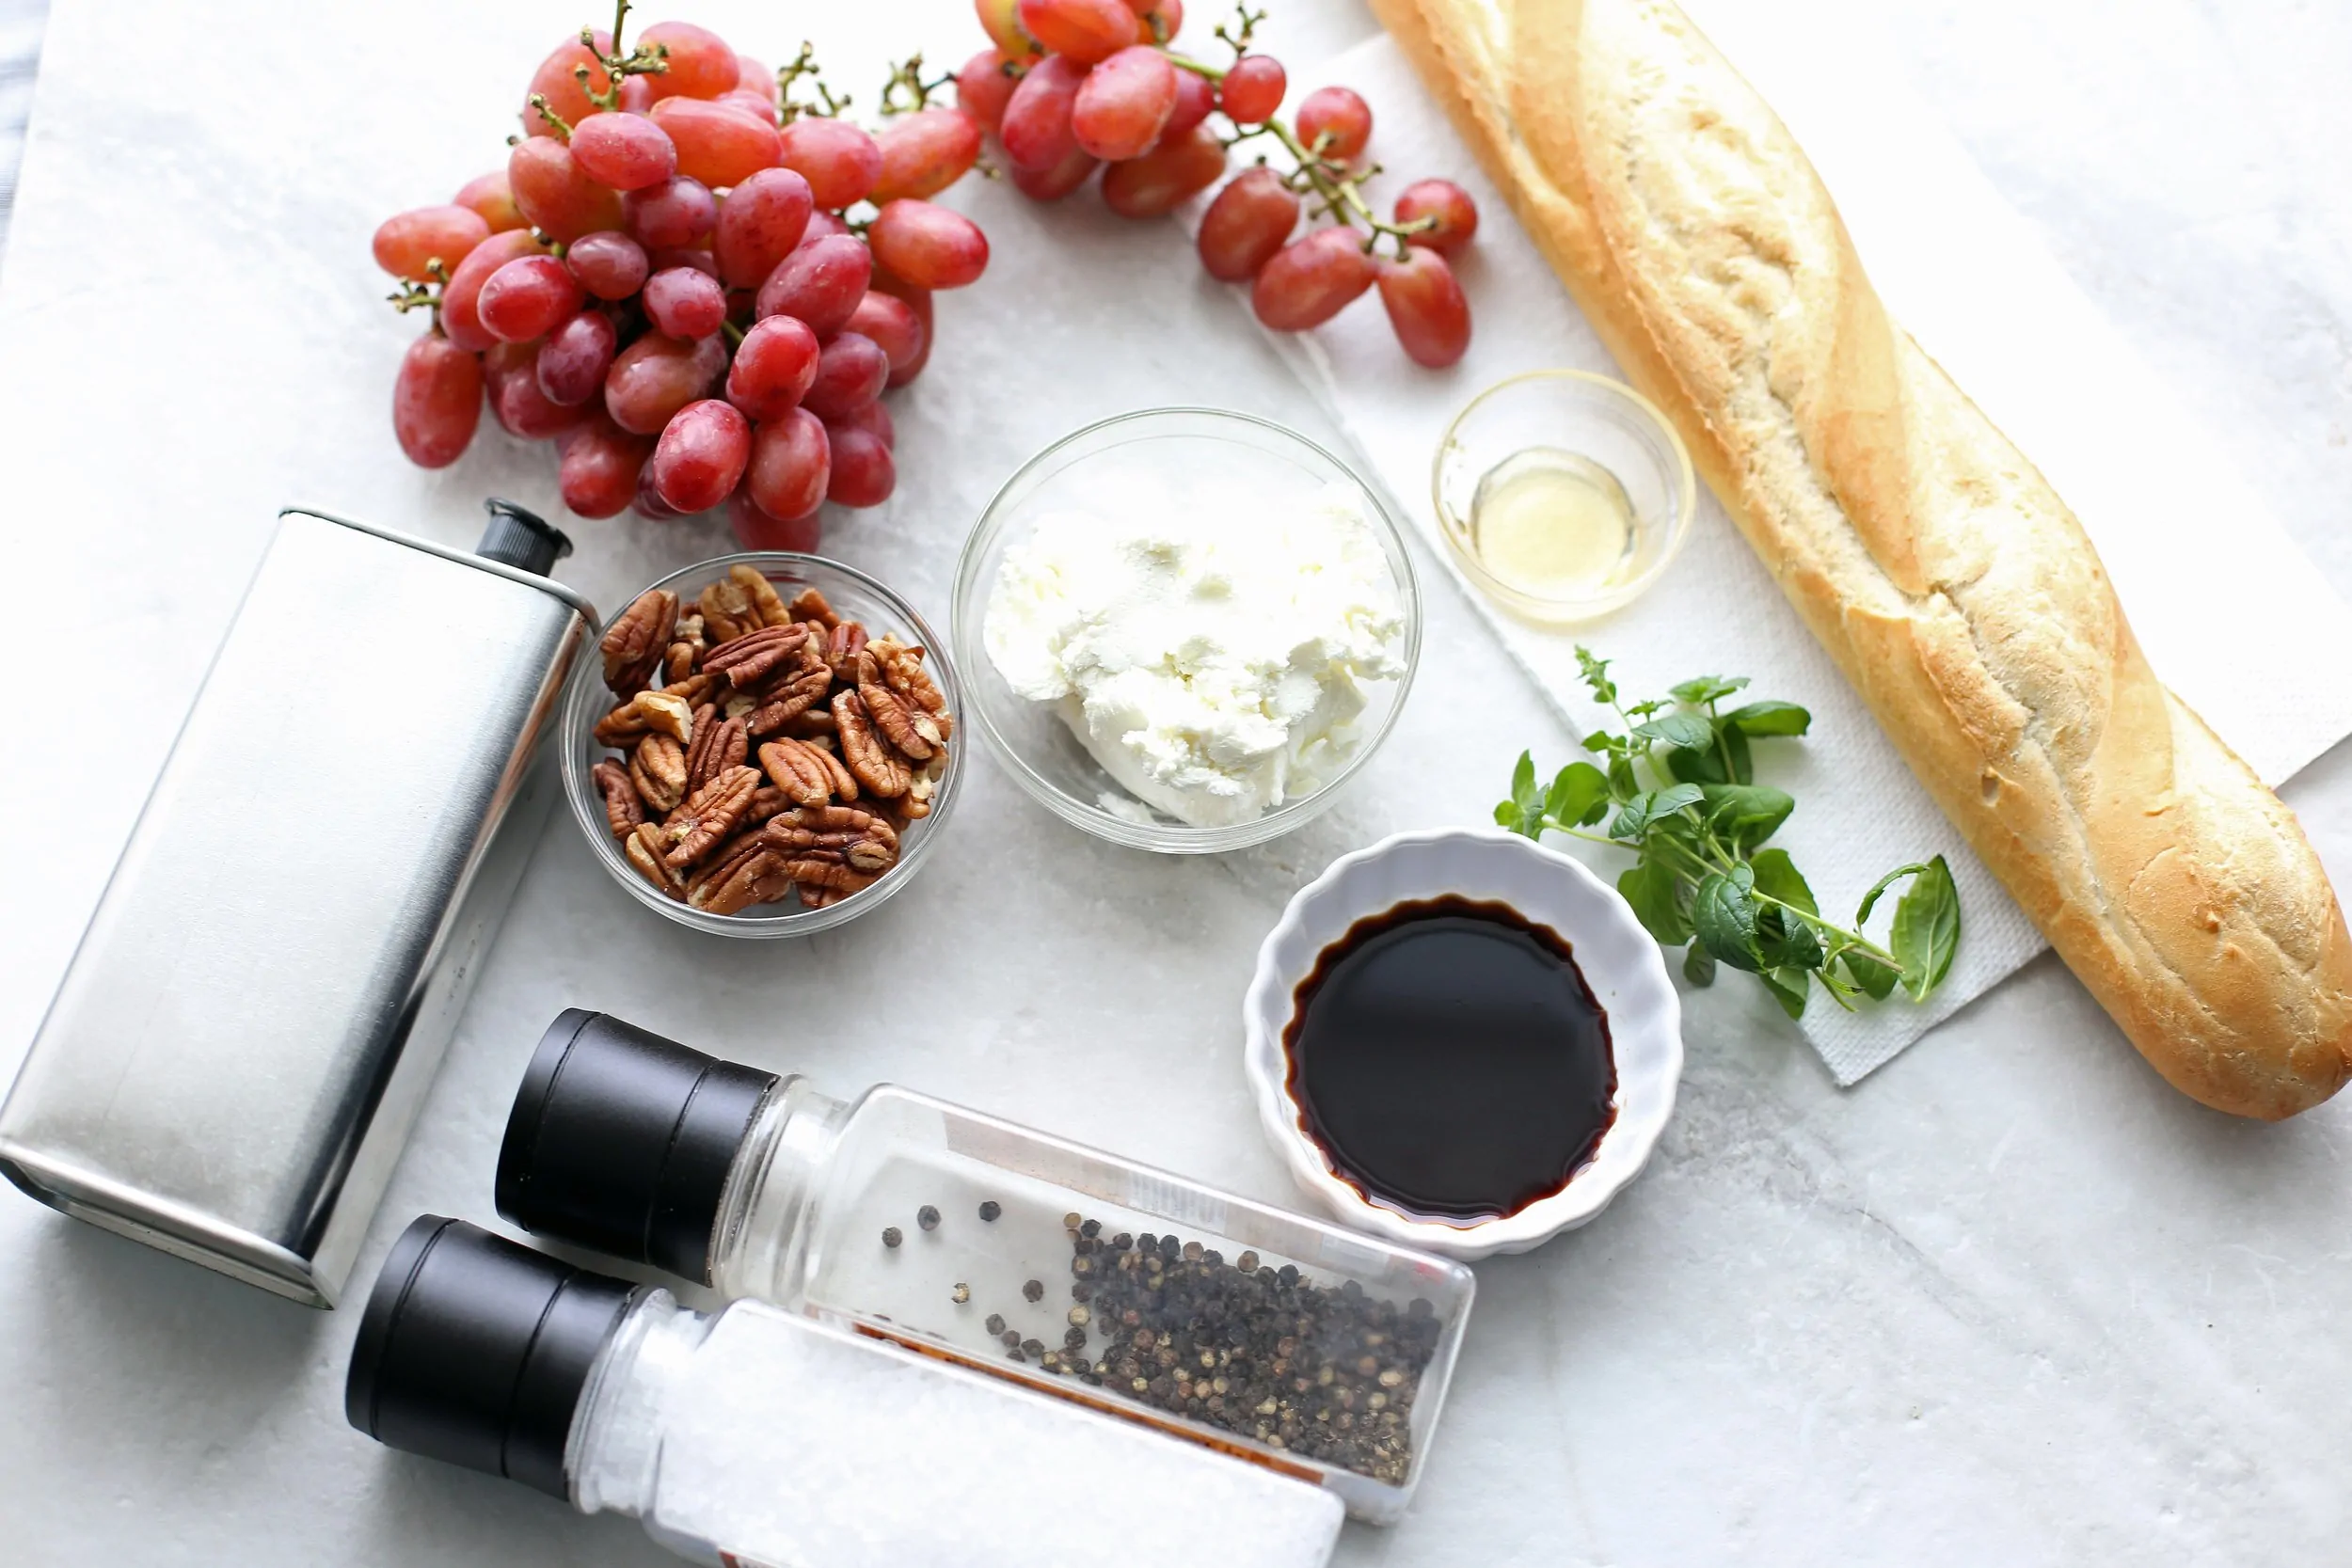 Overview of a baguette, red grapes, goat cheese, balsamic vinegar, fresh mint, pecans, olive oil, salt, and pepper.